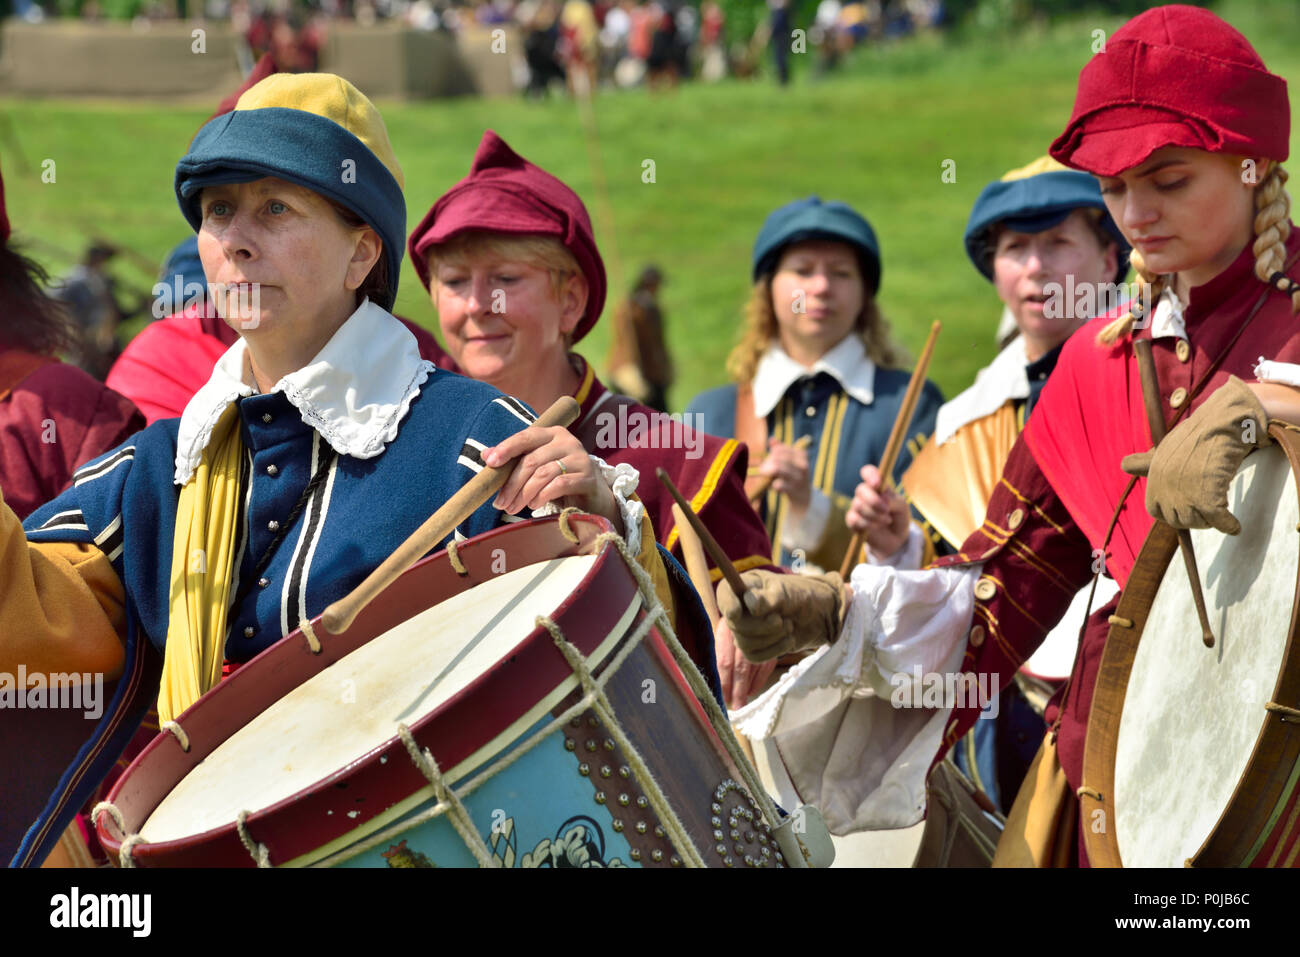 Marching drummers in 17th century costumes during English Civil war re-enactment, years 1641 to 1652, UK Stock Photo